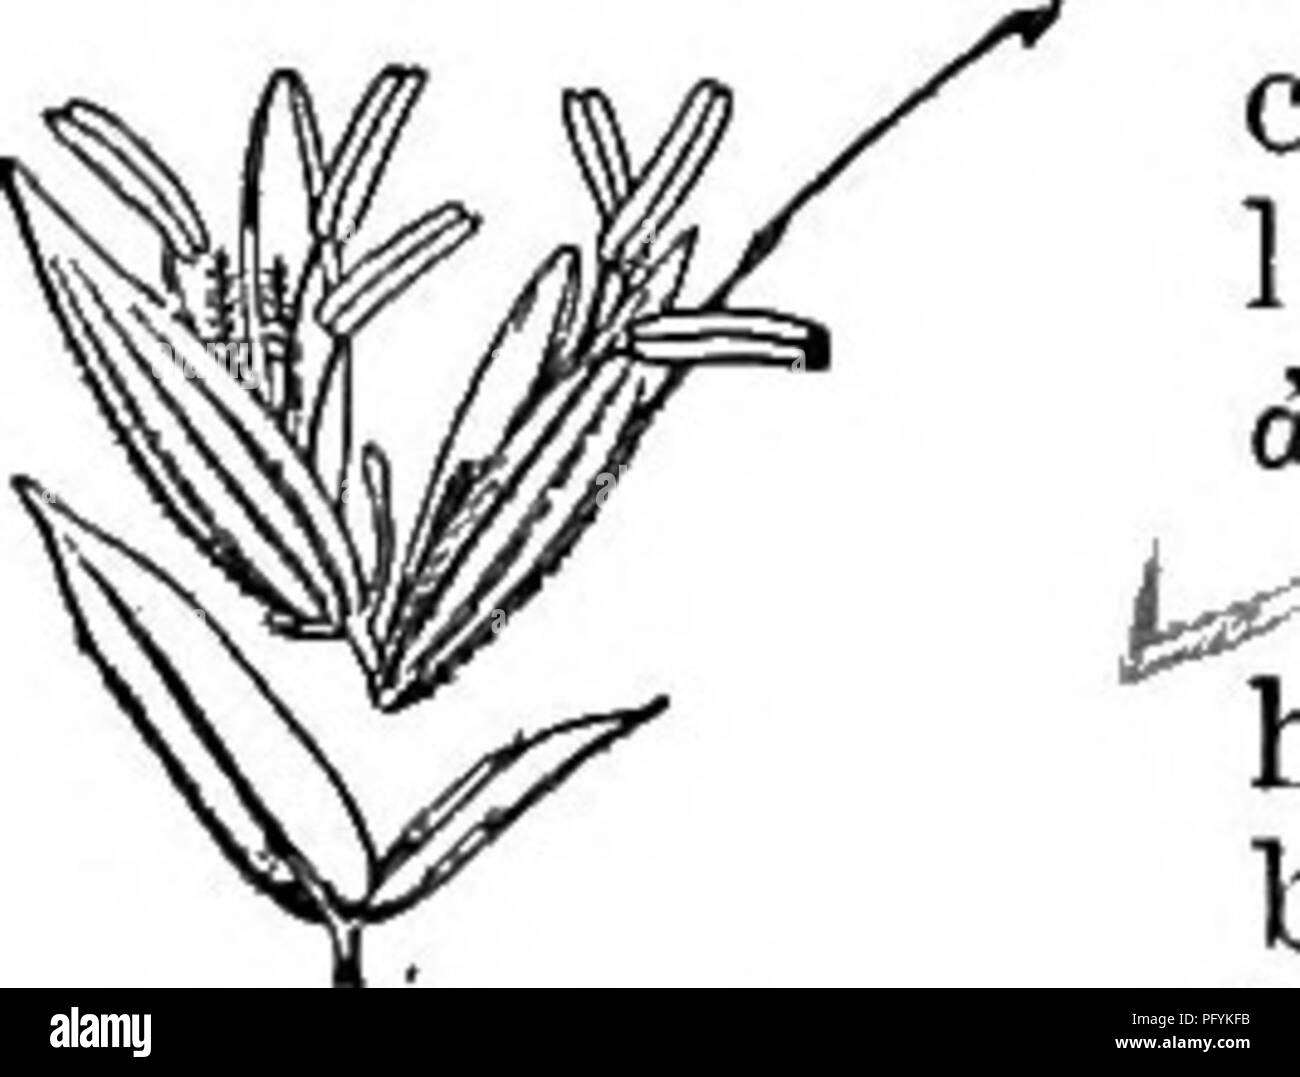 . Gray's new manual of botany. A handbook of the flowering plants and ferns of the central and northeastern United States and adjacent Canada. Botany. 46. ARRHENATHERUM Beauv. Oat Grass Spikelets 2-flowered, the florets approximate, the lower staminate, its lemma bearing a geniculate and twisted awn on the back near the base ; the upper per- fect, its lemma short-awned from or near the apex, or awnless ; rhachilla hairy, prolonged behind the upper palea into a bristle; glumes unequal, acute, thin and scarions; lemmas of firmer texture, 5-7-nerved ; palea ciliate on the nerves.—-Tall perennials Stock Photo